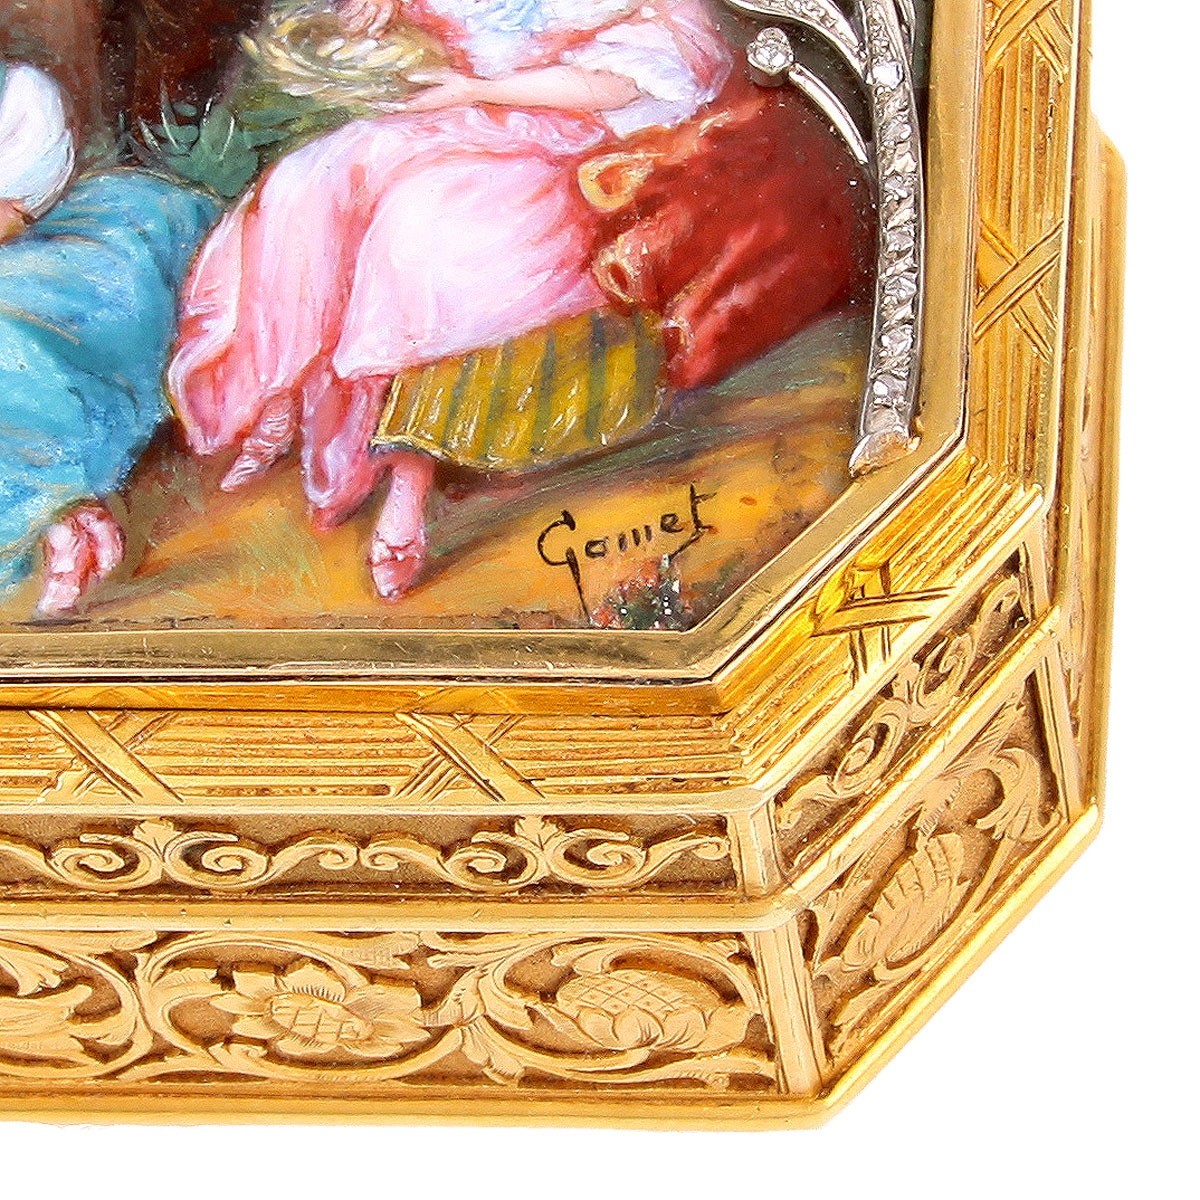 19th Century Continental Gold and Enamel Snuff Box